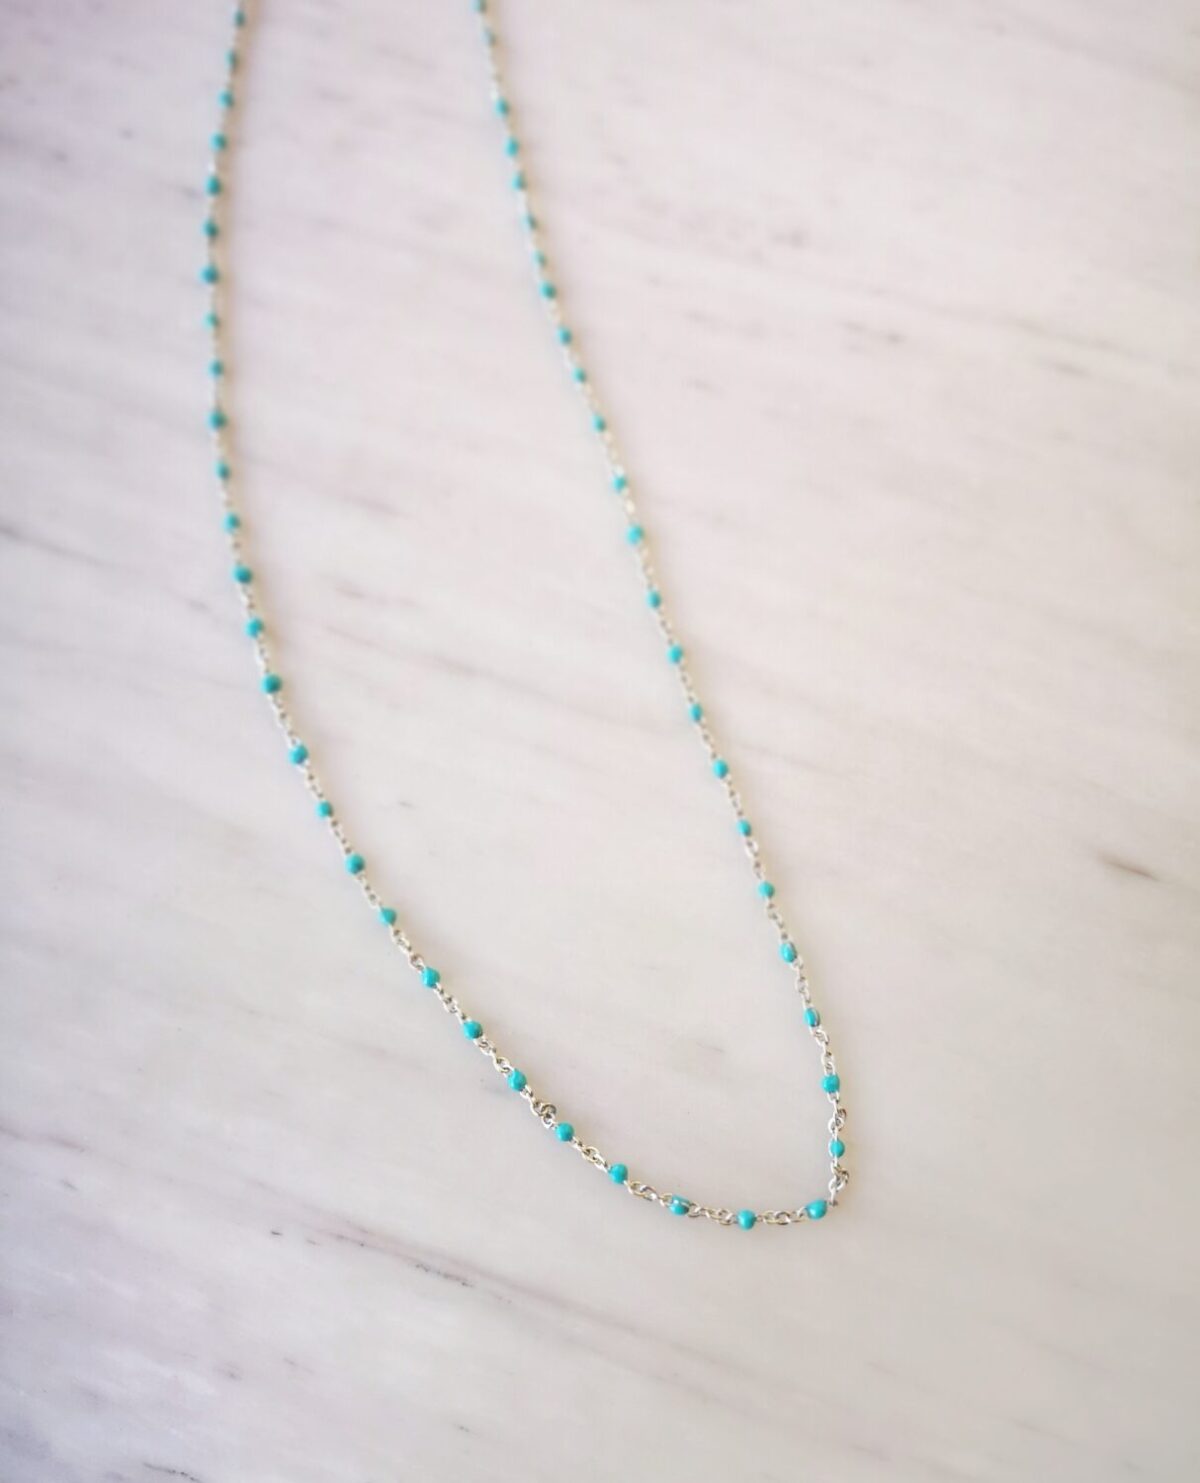 Turquoise rosary necklace